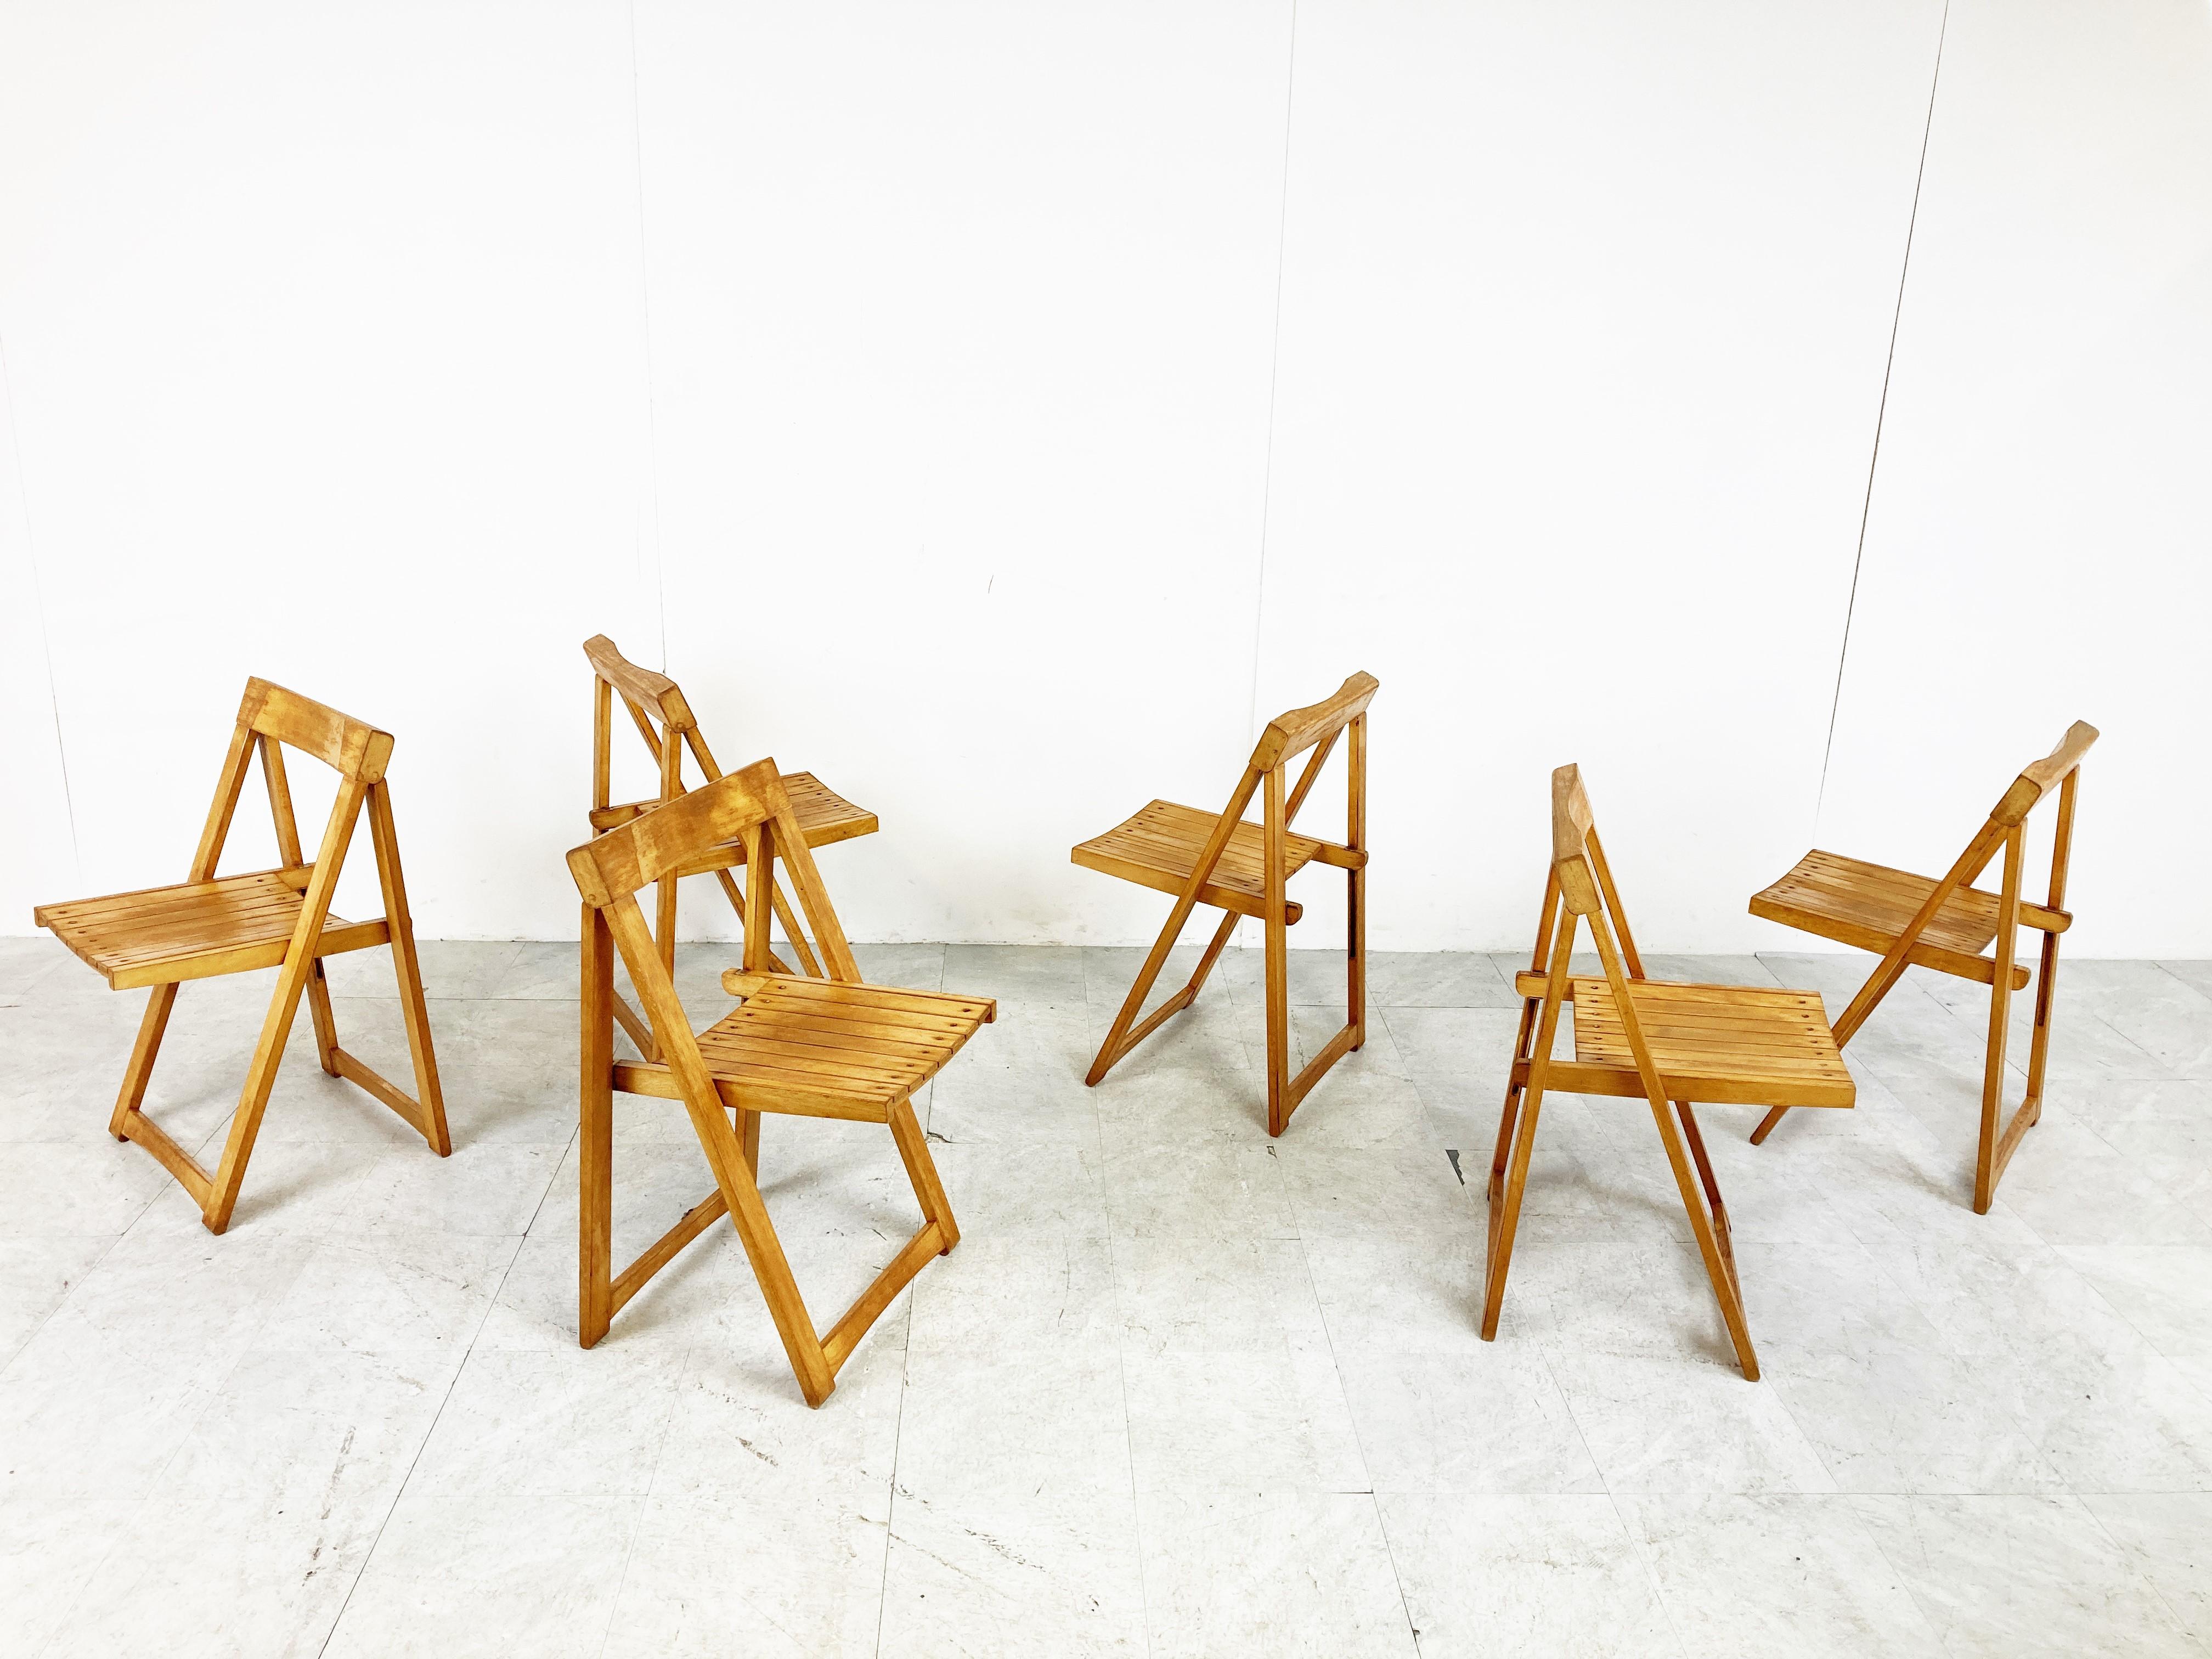 Vintage Wooden Folding Chairs, 1960s For Sale 2